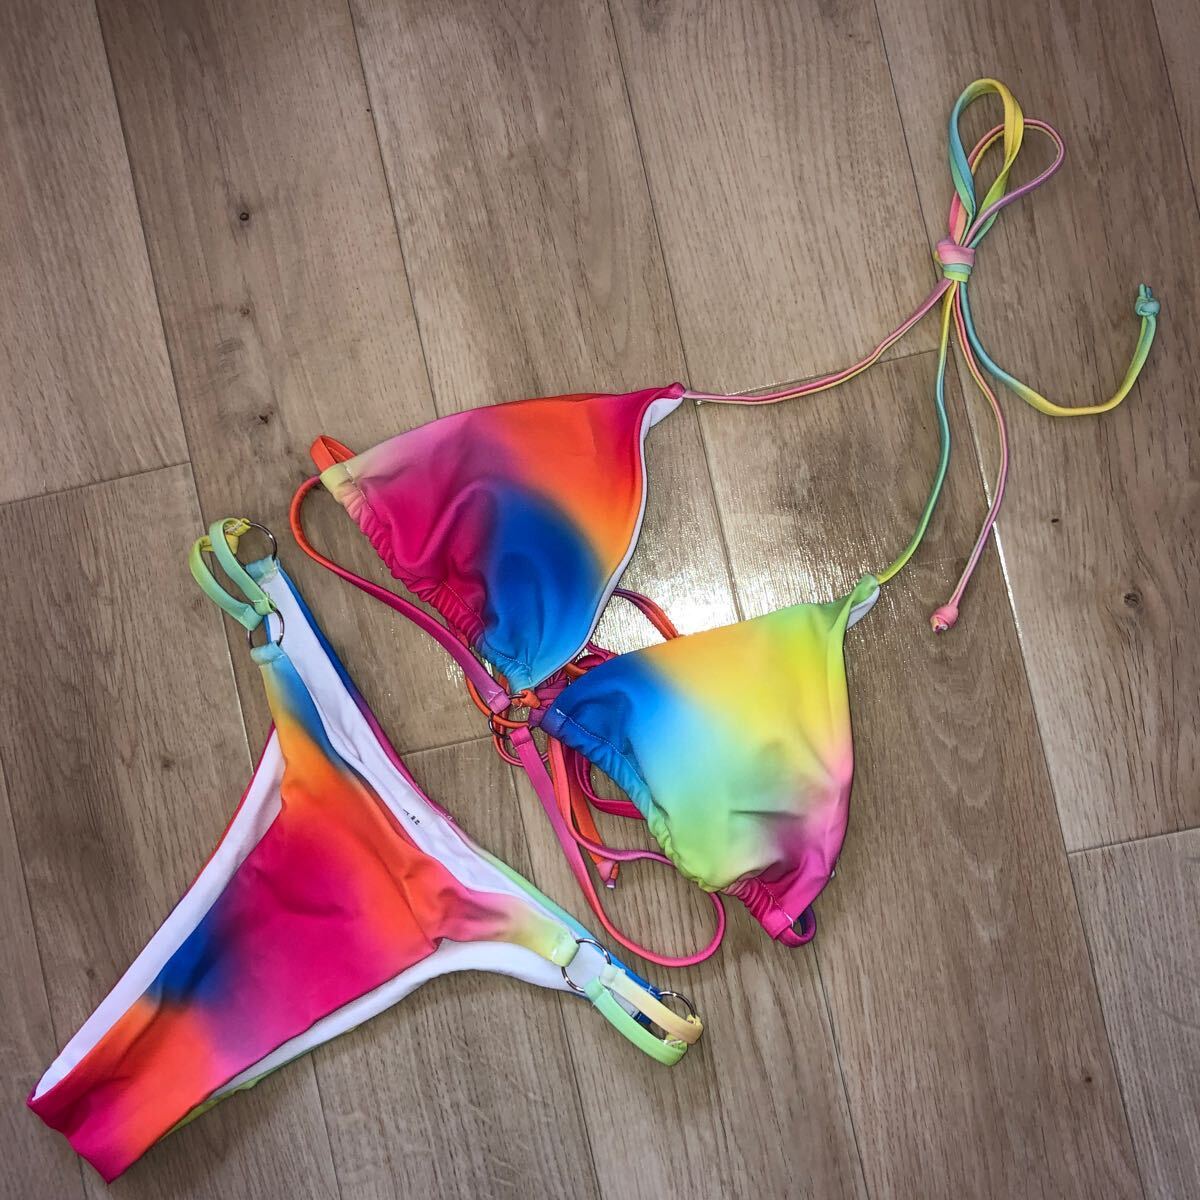 b radio-controller Lien bikini XS swimsuit Rainbow pink orange blue yellow green femi person color new goods abroad imported car T-back 